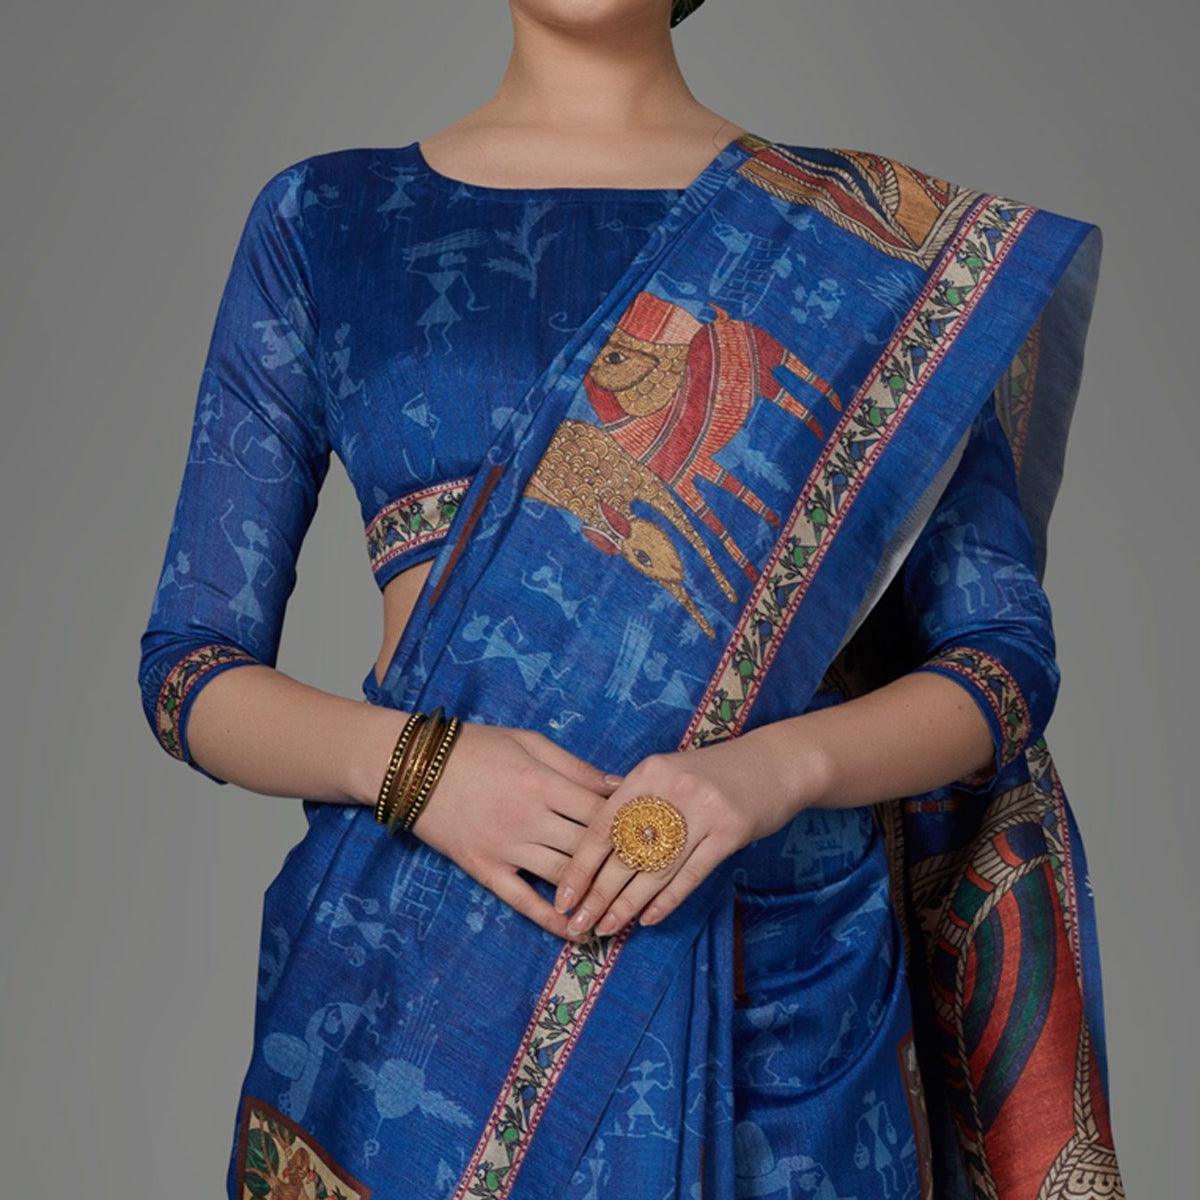 Blue Casual Art Silk Printed Saree With Unstitched Blouse - Peachmode